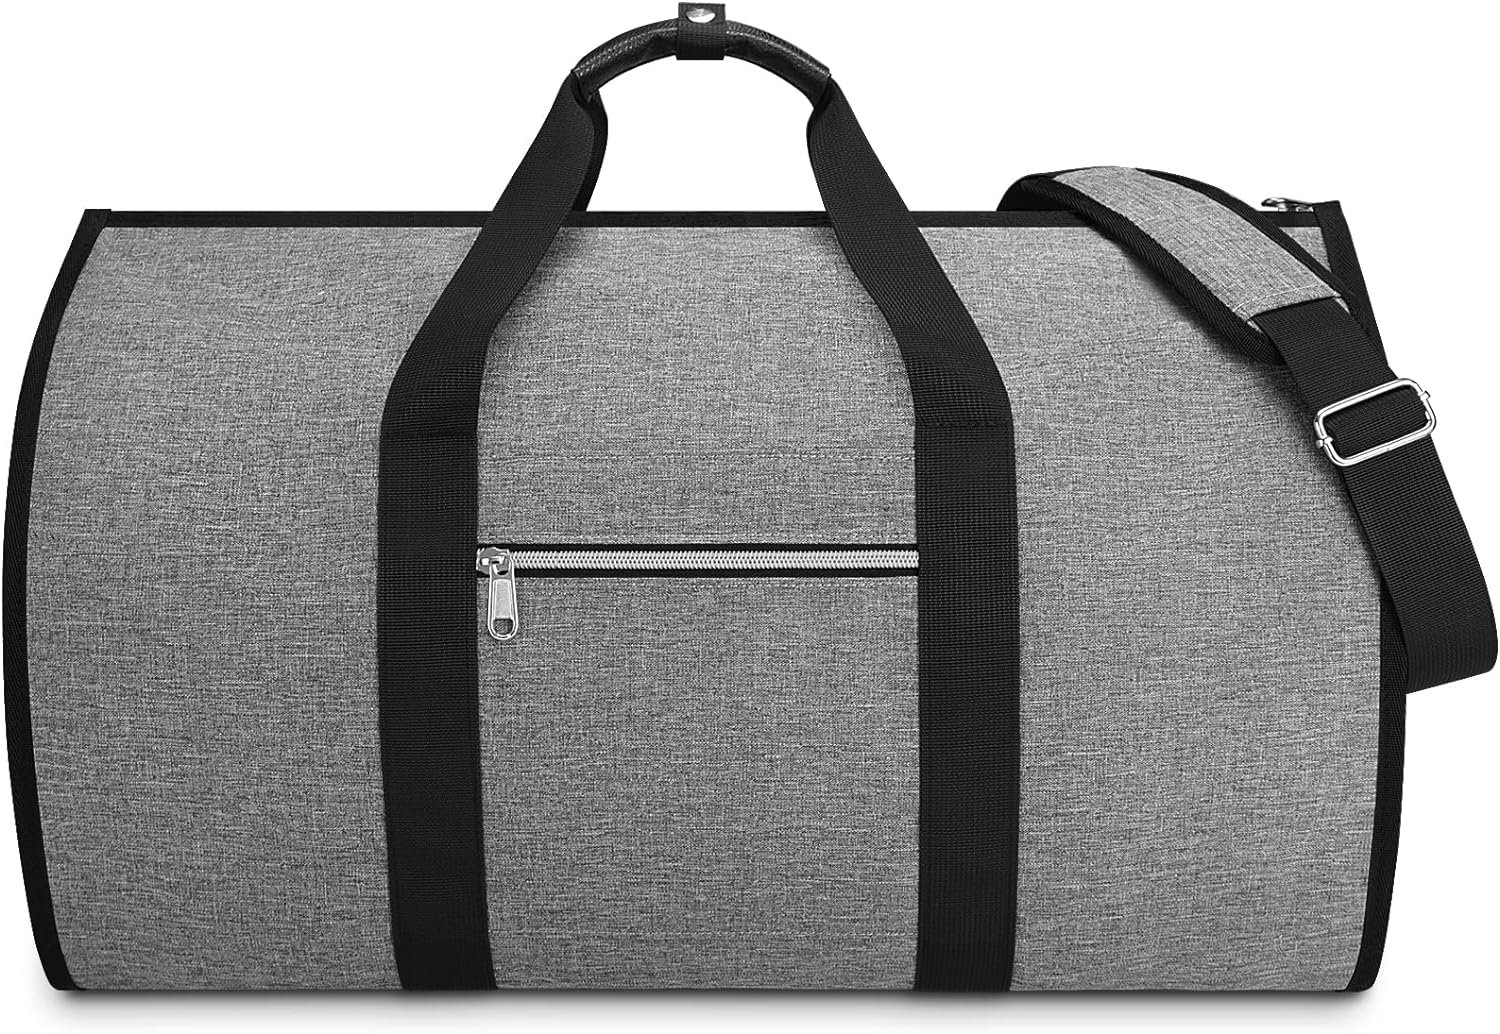 Carry On Garment Bags for Travel,Suit Travel Bag for Men Women,With Shoulder Strap for Business Trips Bag 2 in1 Suitcase for Foldable Luggage Bag